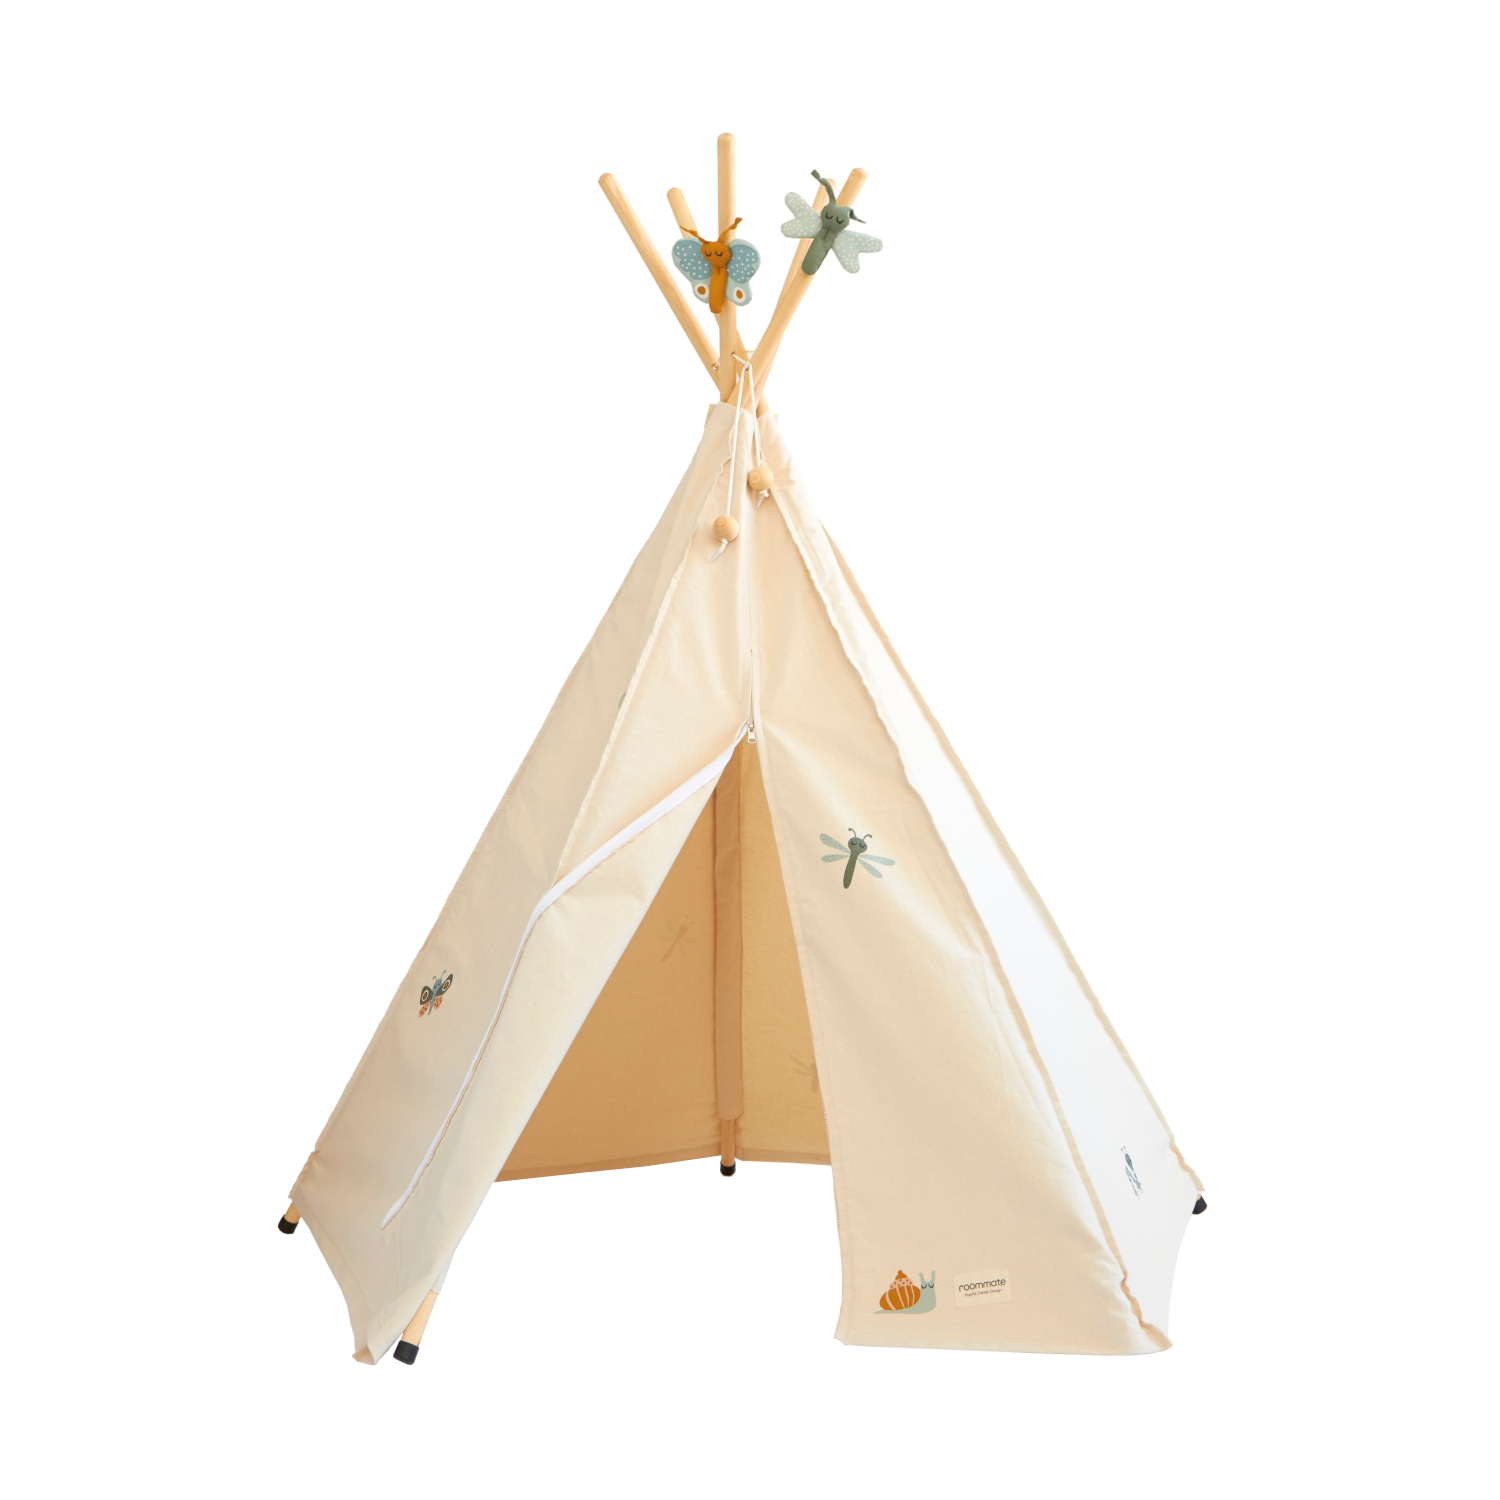 RoomMate Hippie Baby Bugs Tipi Tent